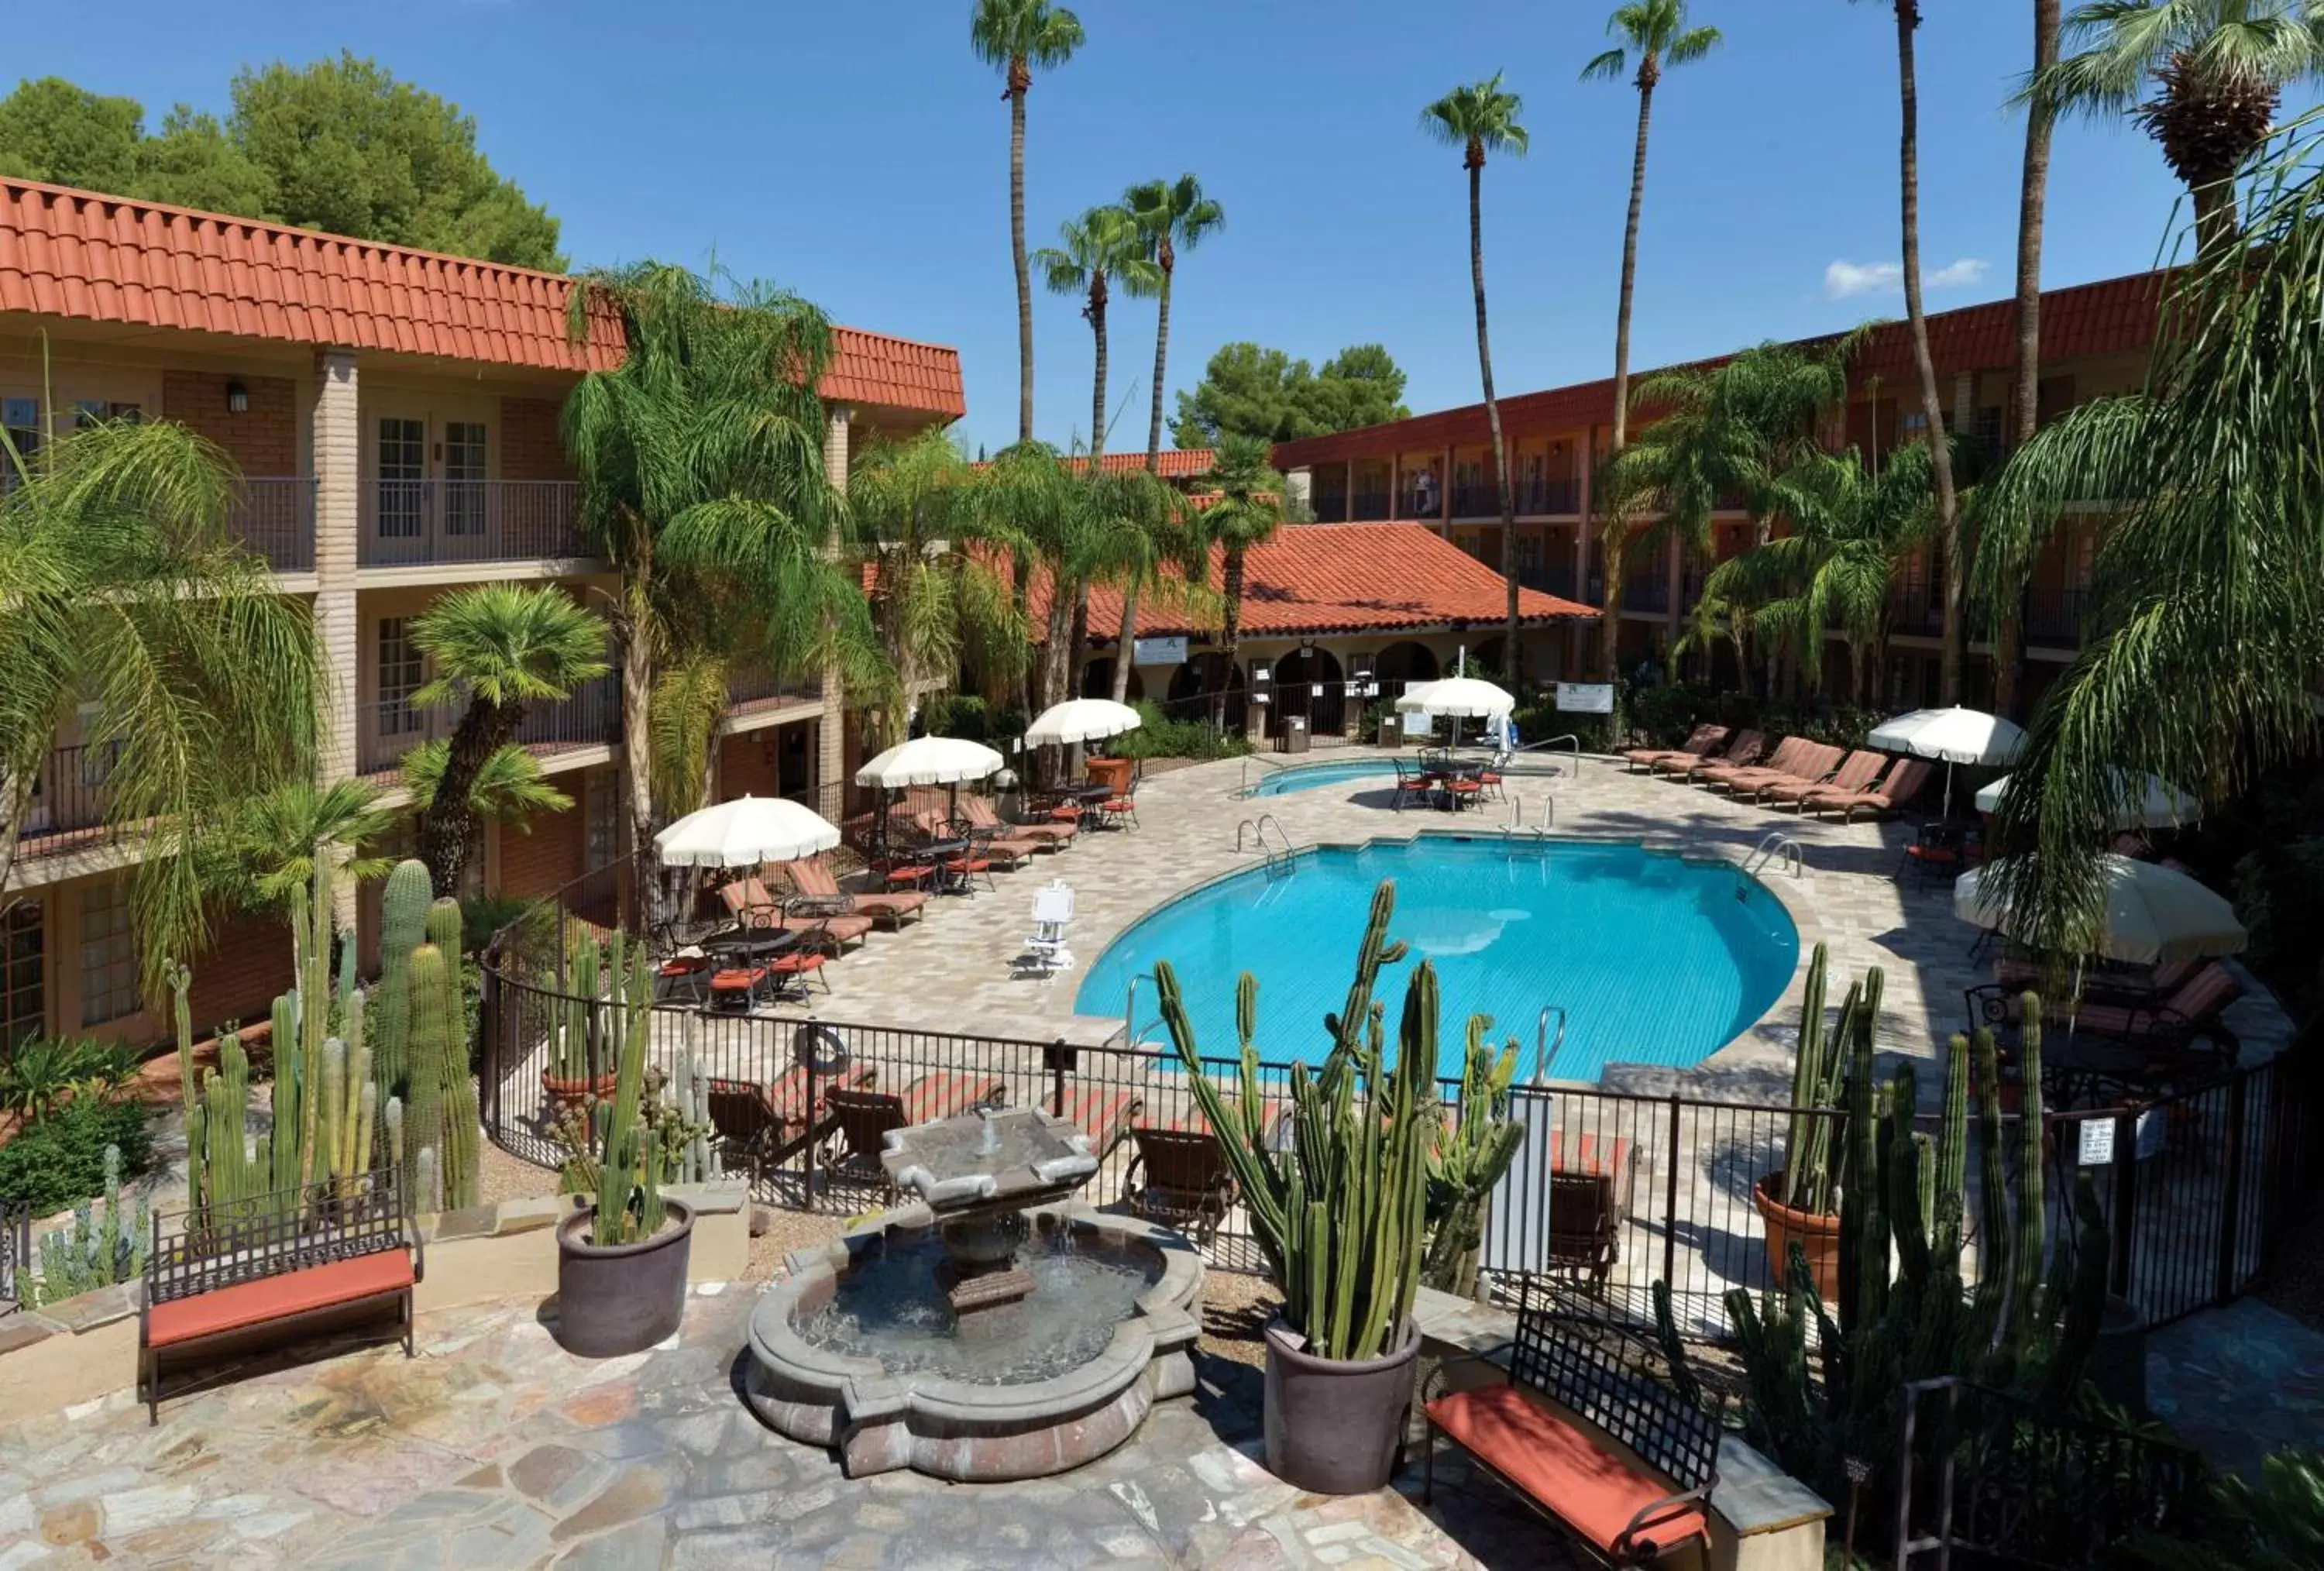 Property building, Pool View in DoubleTree Suites by Hilton Tucson-Williams Center